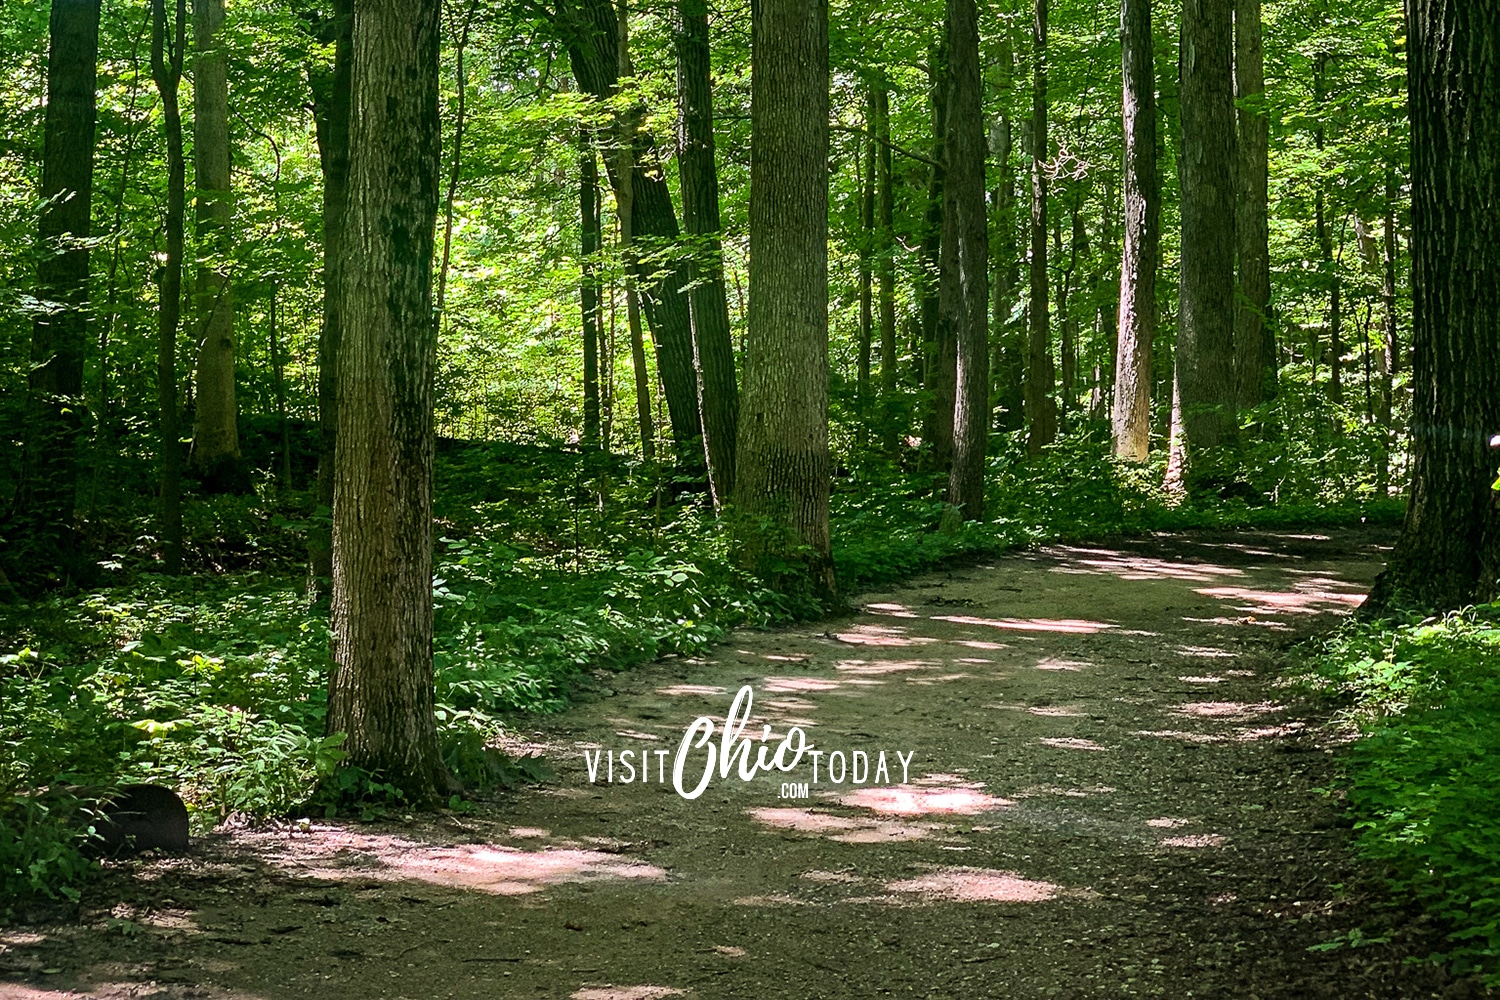 horizontal photo showing a trail path through trees, with the sun creating a dappled pattern on the ground Photo credit: Cindy Gordon of VisitOhioToday.com